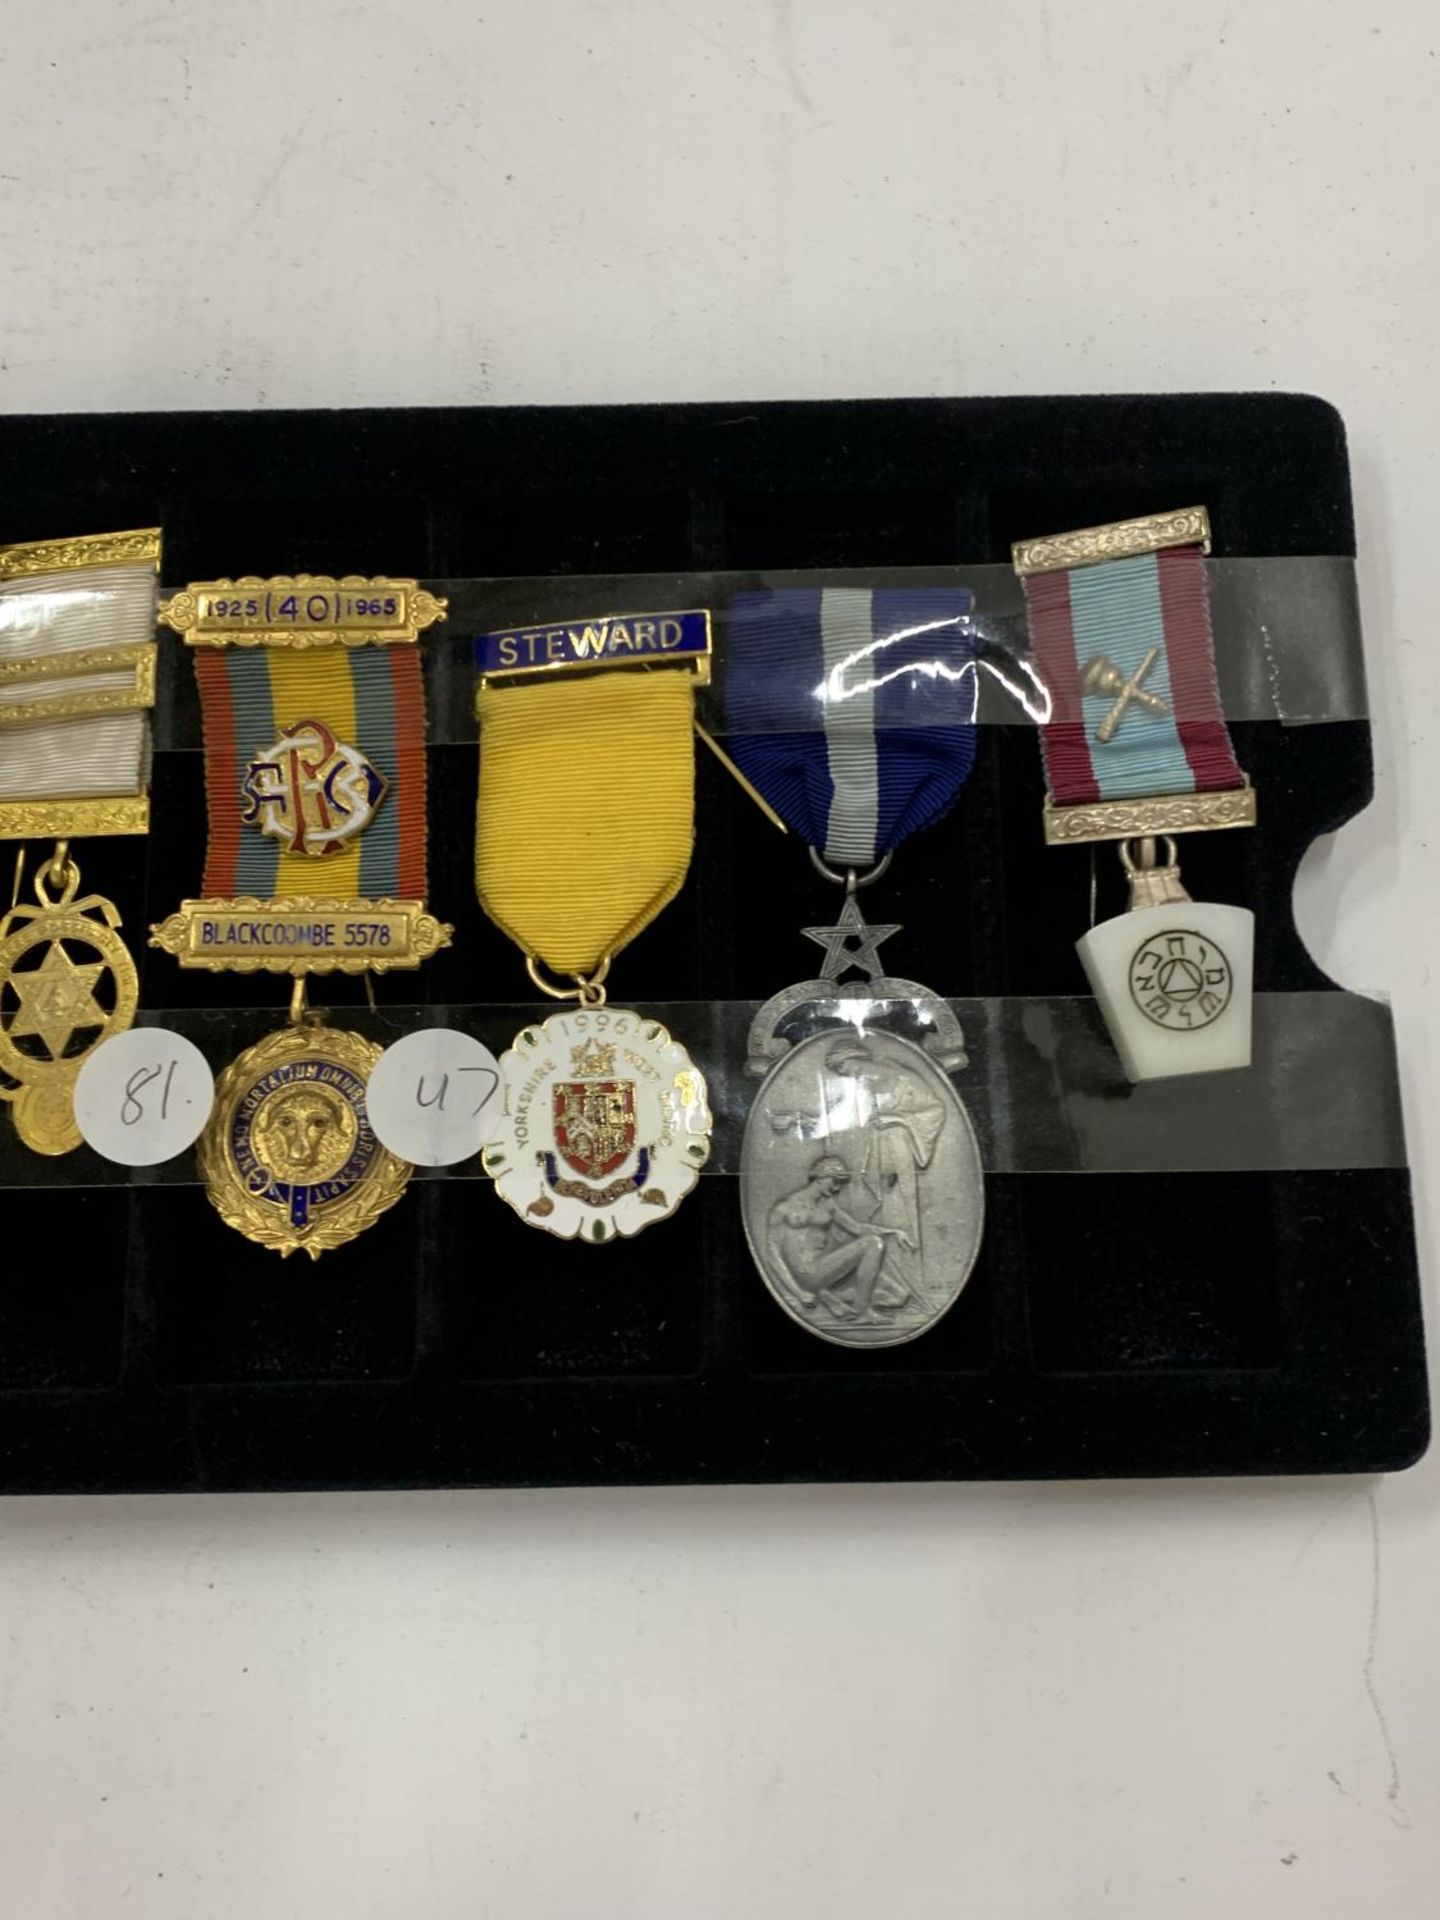 A COLLECTION OF MASONIC MEDALS - 8 IN TOTAL - Image 6 of 6